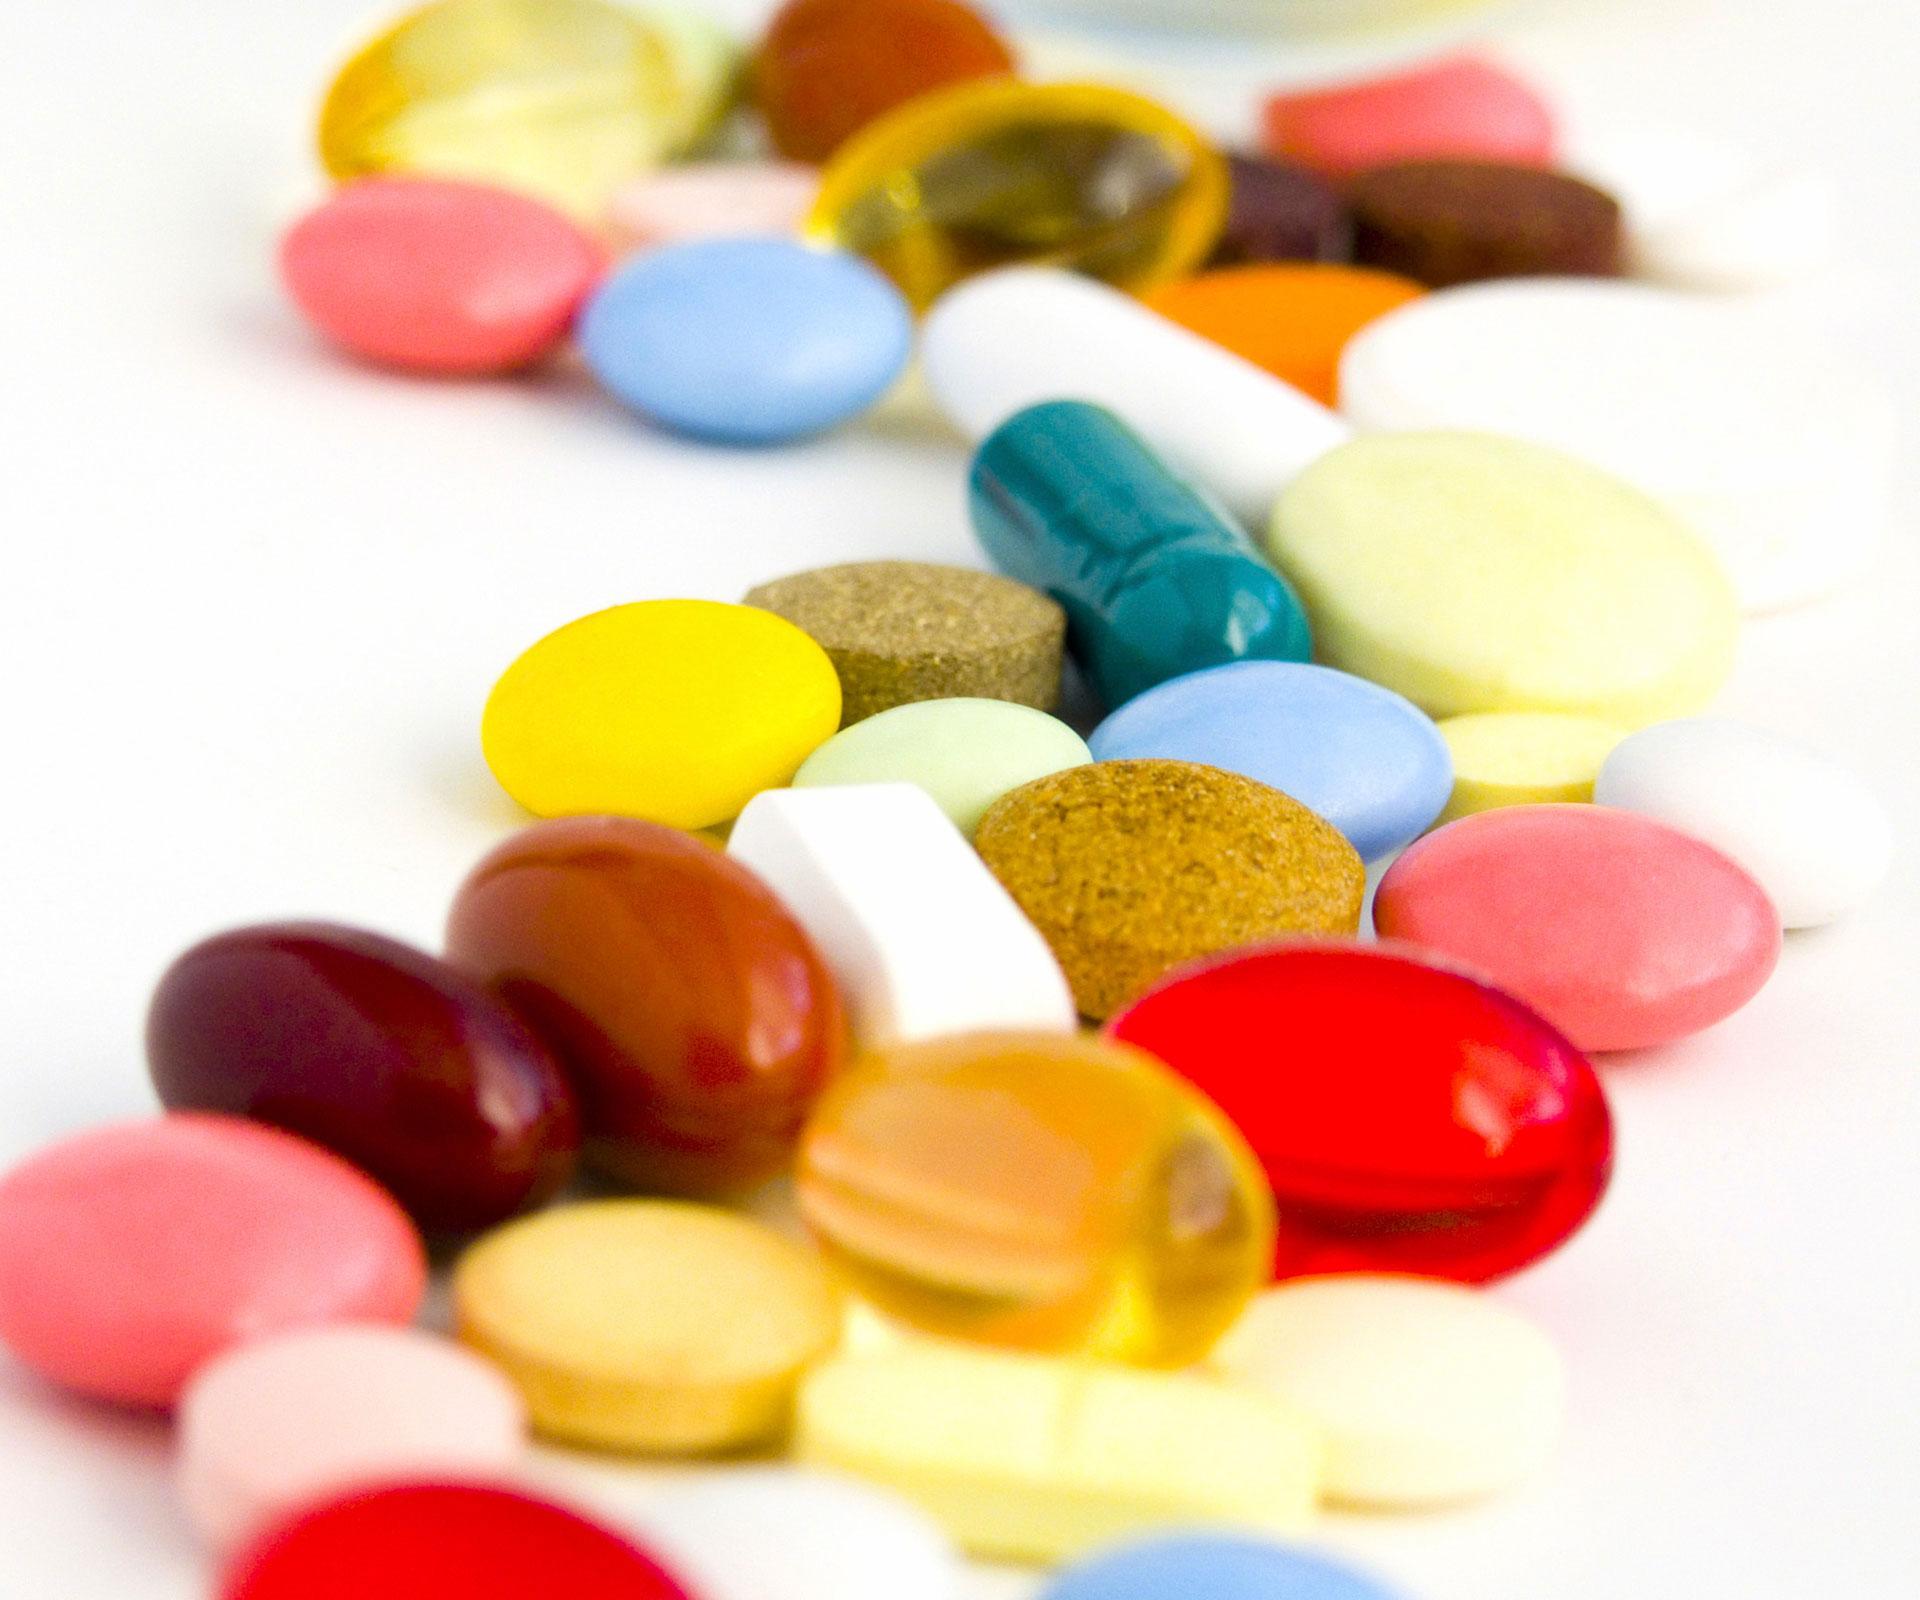 Are synthetic and natural vitamins created equal?